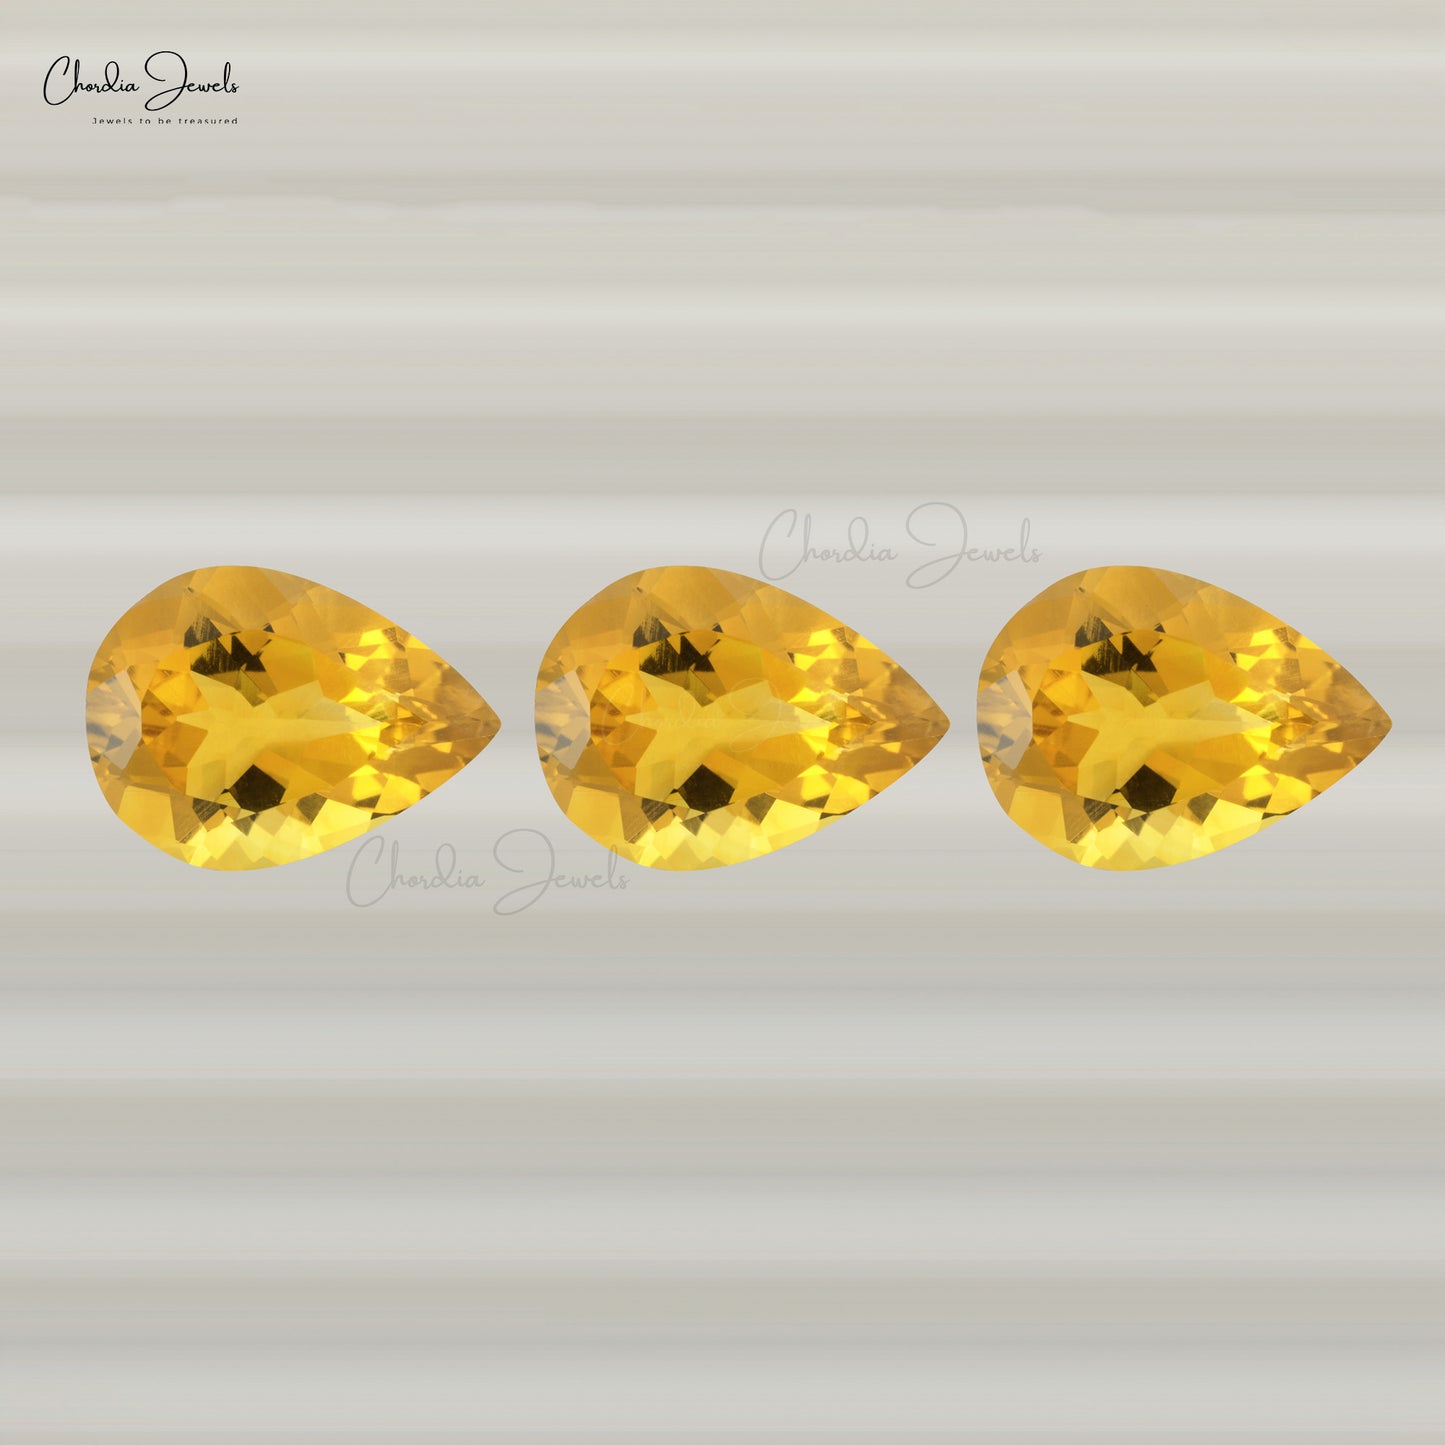 18x13 MM Fine Quality Citrine Pear Natural Loose gemstone at Discount Price, 1 Piece